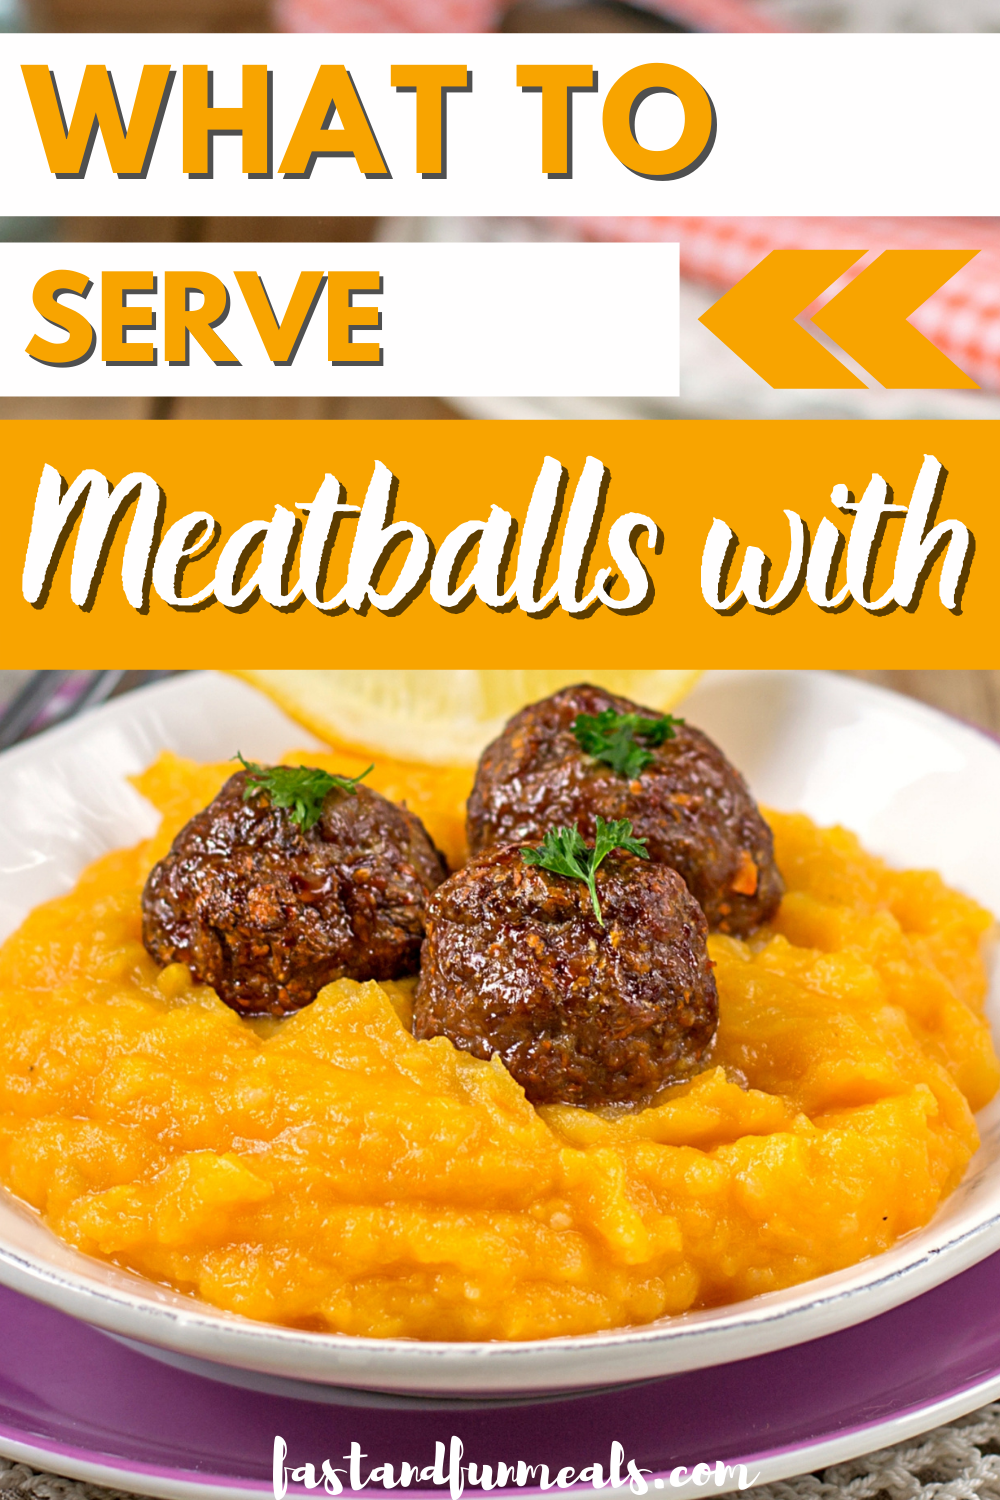 Pin showing the title What to Serve Meatballs With